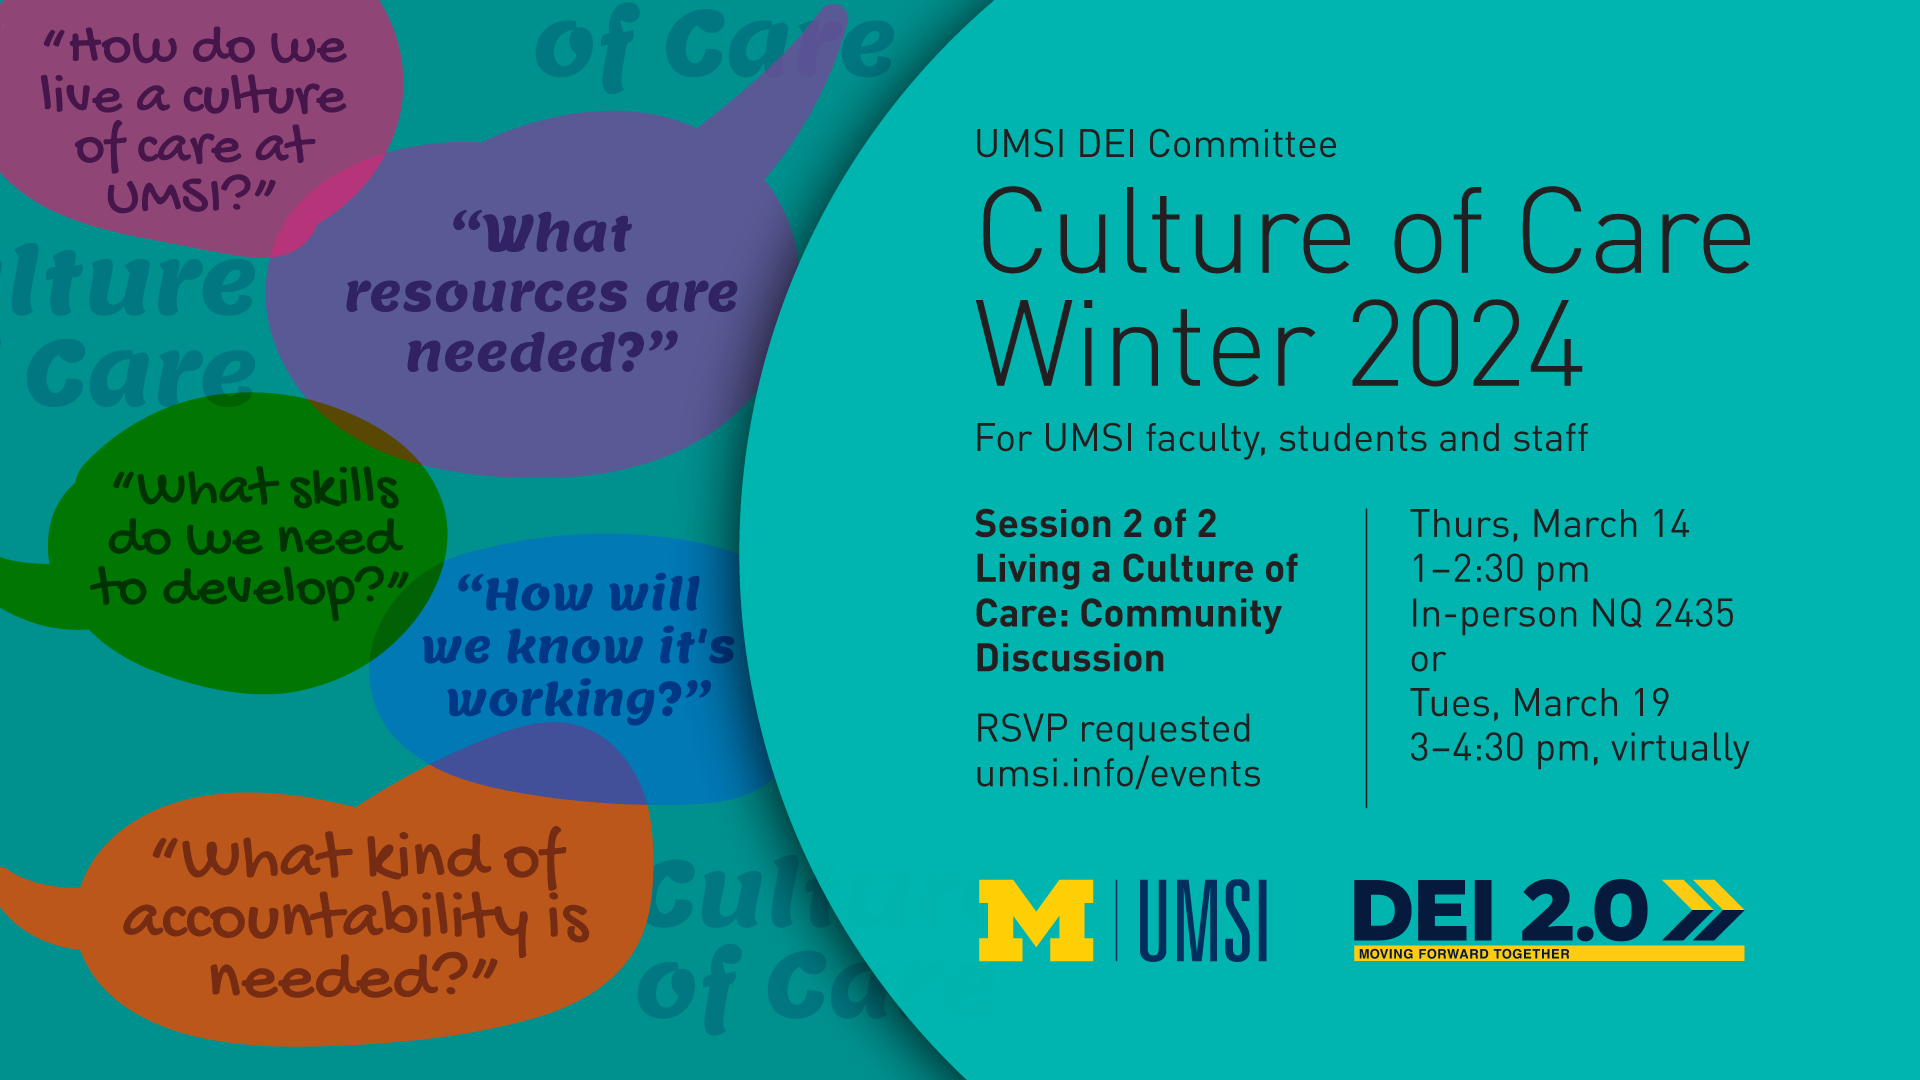 “Culture of Care Winter 2024. For UMSI faculty, students and staff. Session 2 of 2: Living a Culture of Care: Community Discussion. Thurs, March 14 1-2:30 pm In-person NQ 2435 or Tues, March 19 3-4:30 pm, virtually. RSVP requested. umsi.info/events. UMSI DEI Committee. DEI 2.0 Moving Forward Together.” Collage of speech bubbles: “How do we live a culture of care at UMSI? What resources are needed? What skills do we need to develop? How will we know it’s working? What kind of accountability is needed?"